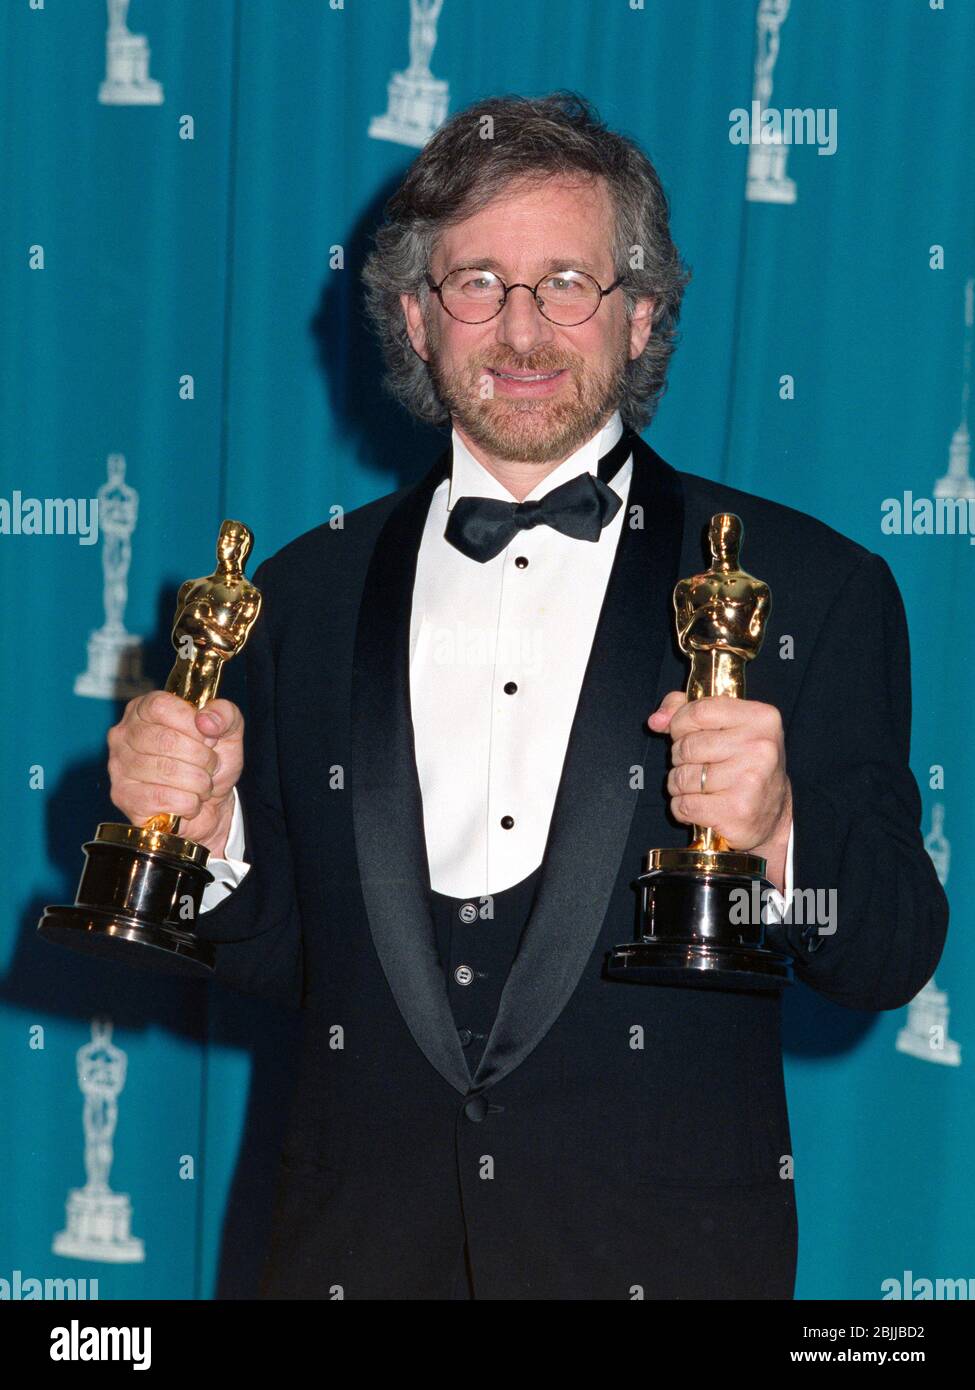 LOS ANGELES, CA. c.1994: Director Steven Spielberg with his Oscars for Best Director & Best Picture for Schindler's List at the 1994 Academy Awards.  File photo © Paul Smith/Featureflash Stock Photo